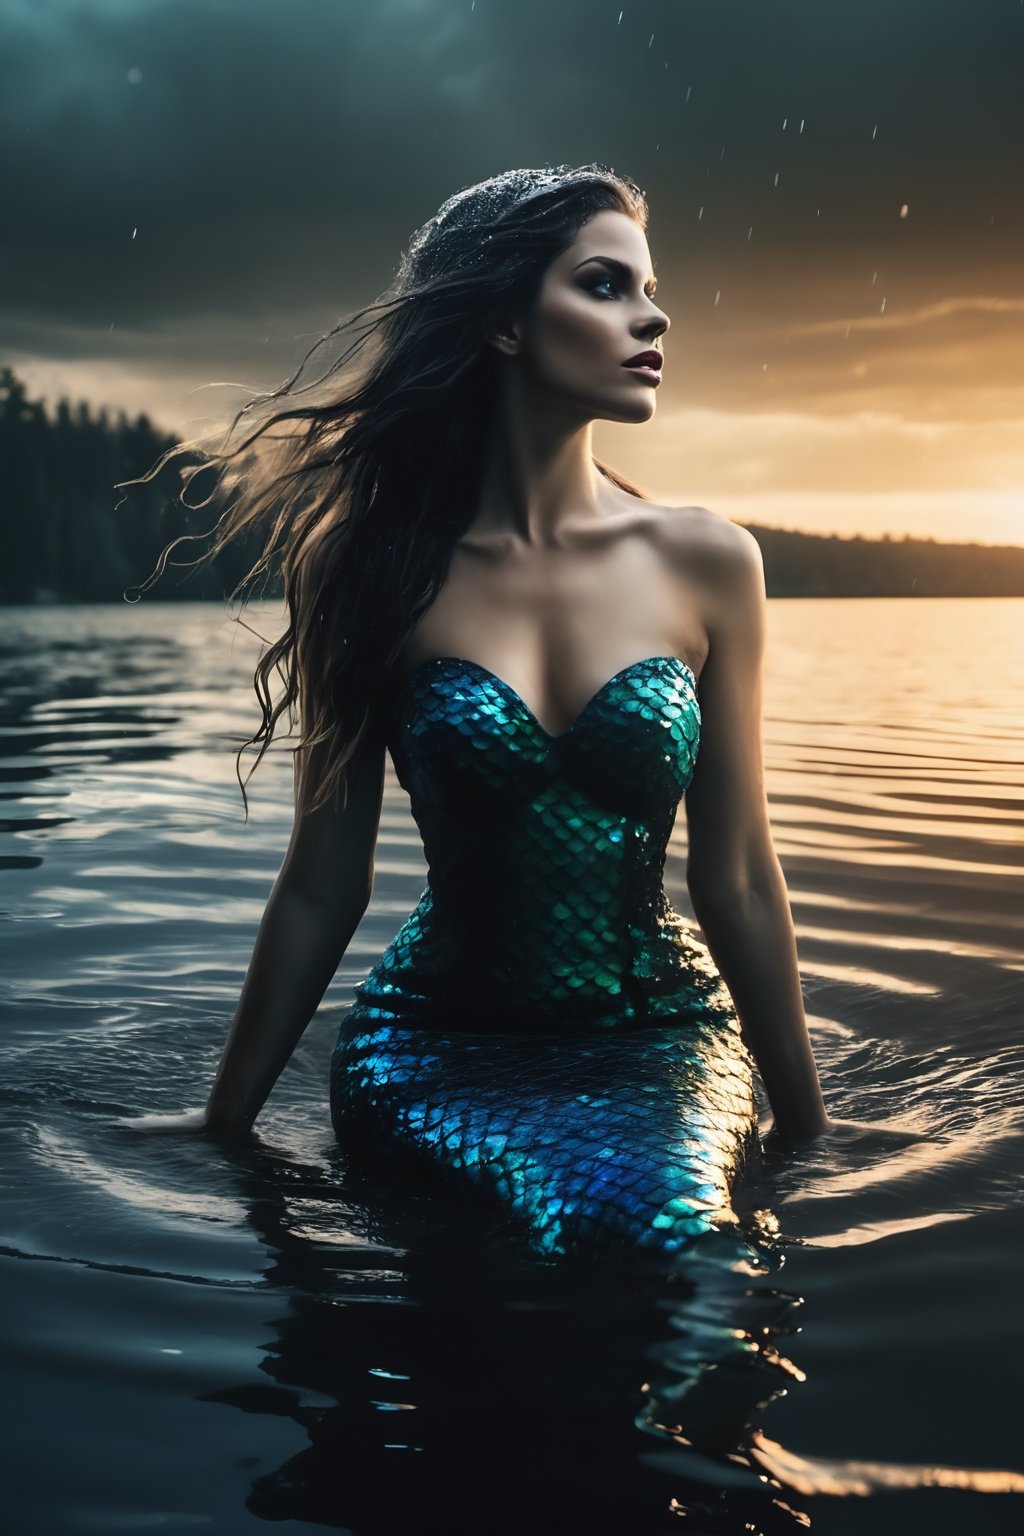 expressive style, Beautiful mermaid on a lake, wet and dense, mysterious, siren, unholy, creepy, horror, dark, intricate design and details, dramatic lighting, photorealistic, cinematic, 8k